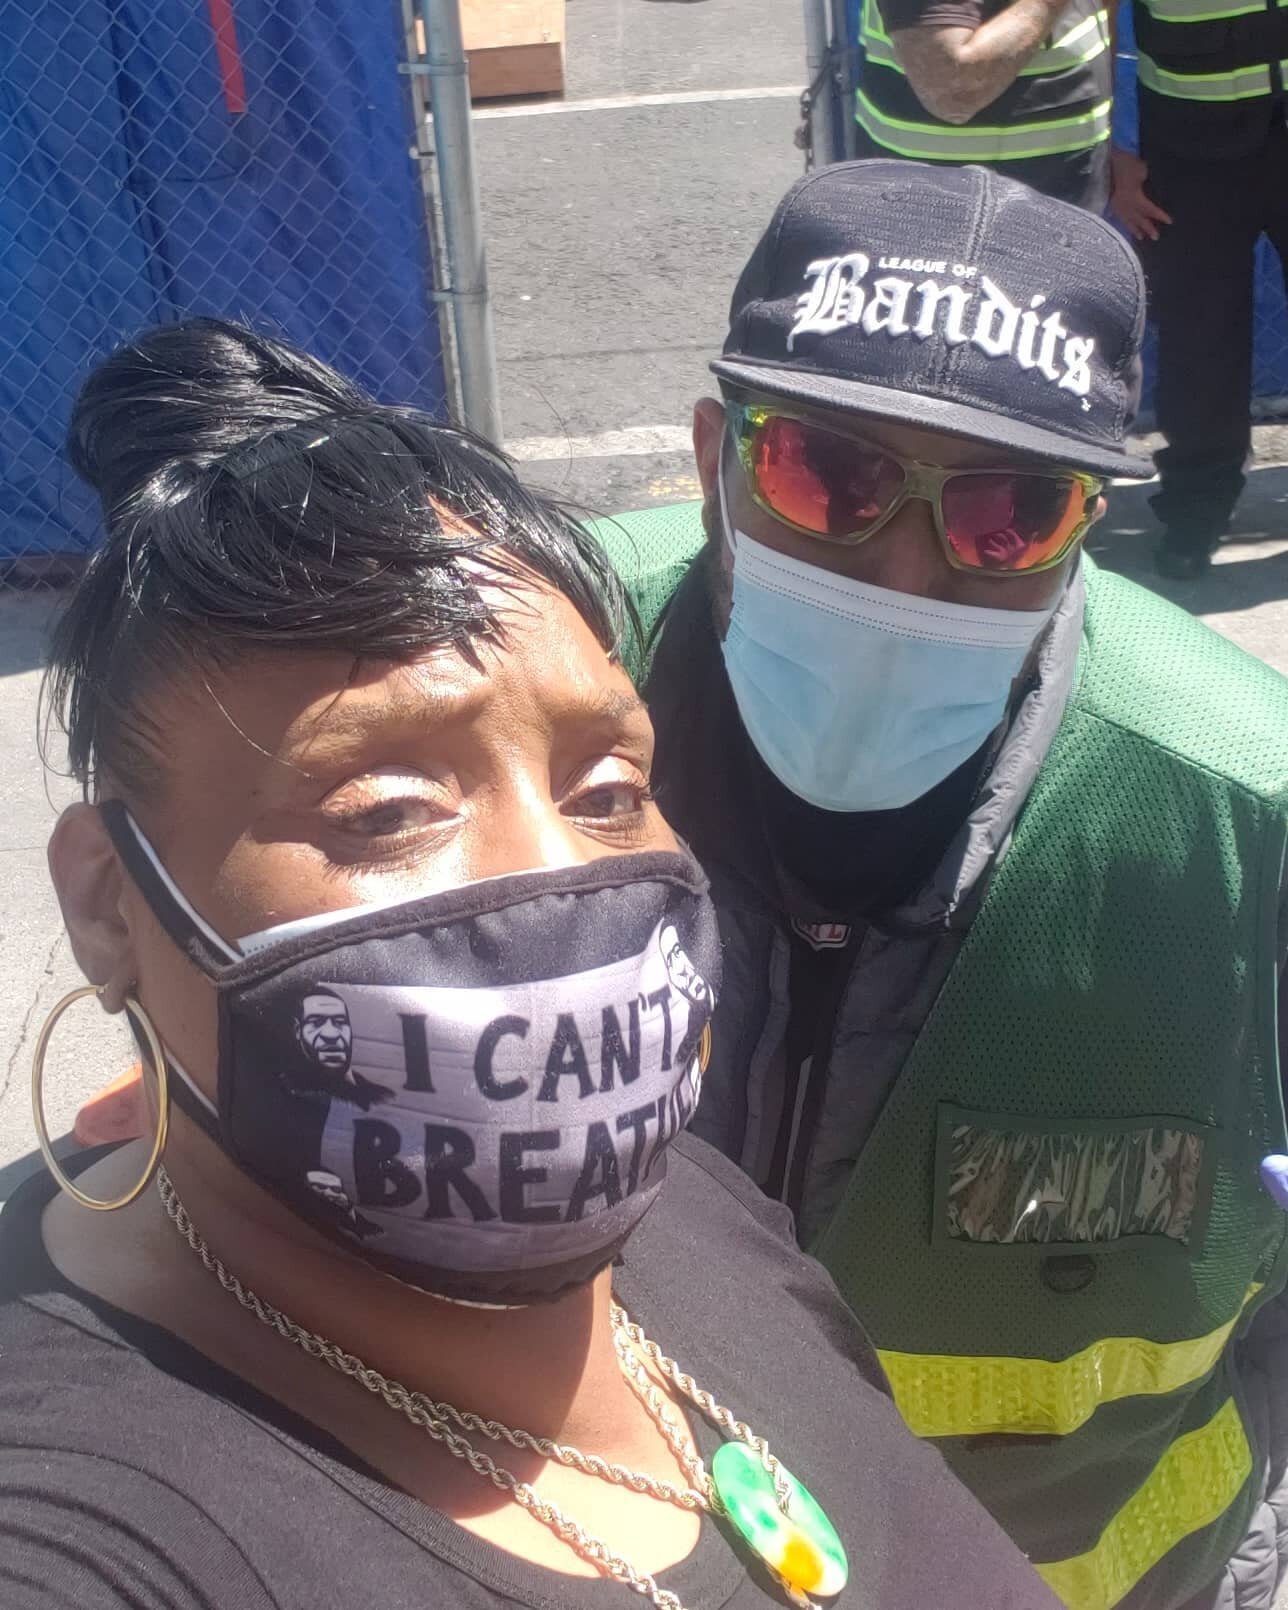 Big Rodney and I just finished passing out bags lunches, to the homeless down in the tenderloin. We love helping out with our community💯🙌🏾🥰. #URBLESSINGS I would like to thank #successcenter #ZuniCafe #mayorsoffice #minniebells #peachespatties #c